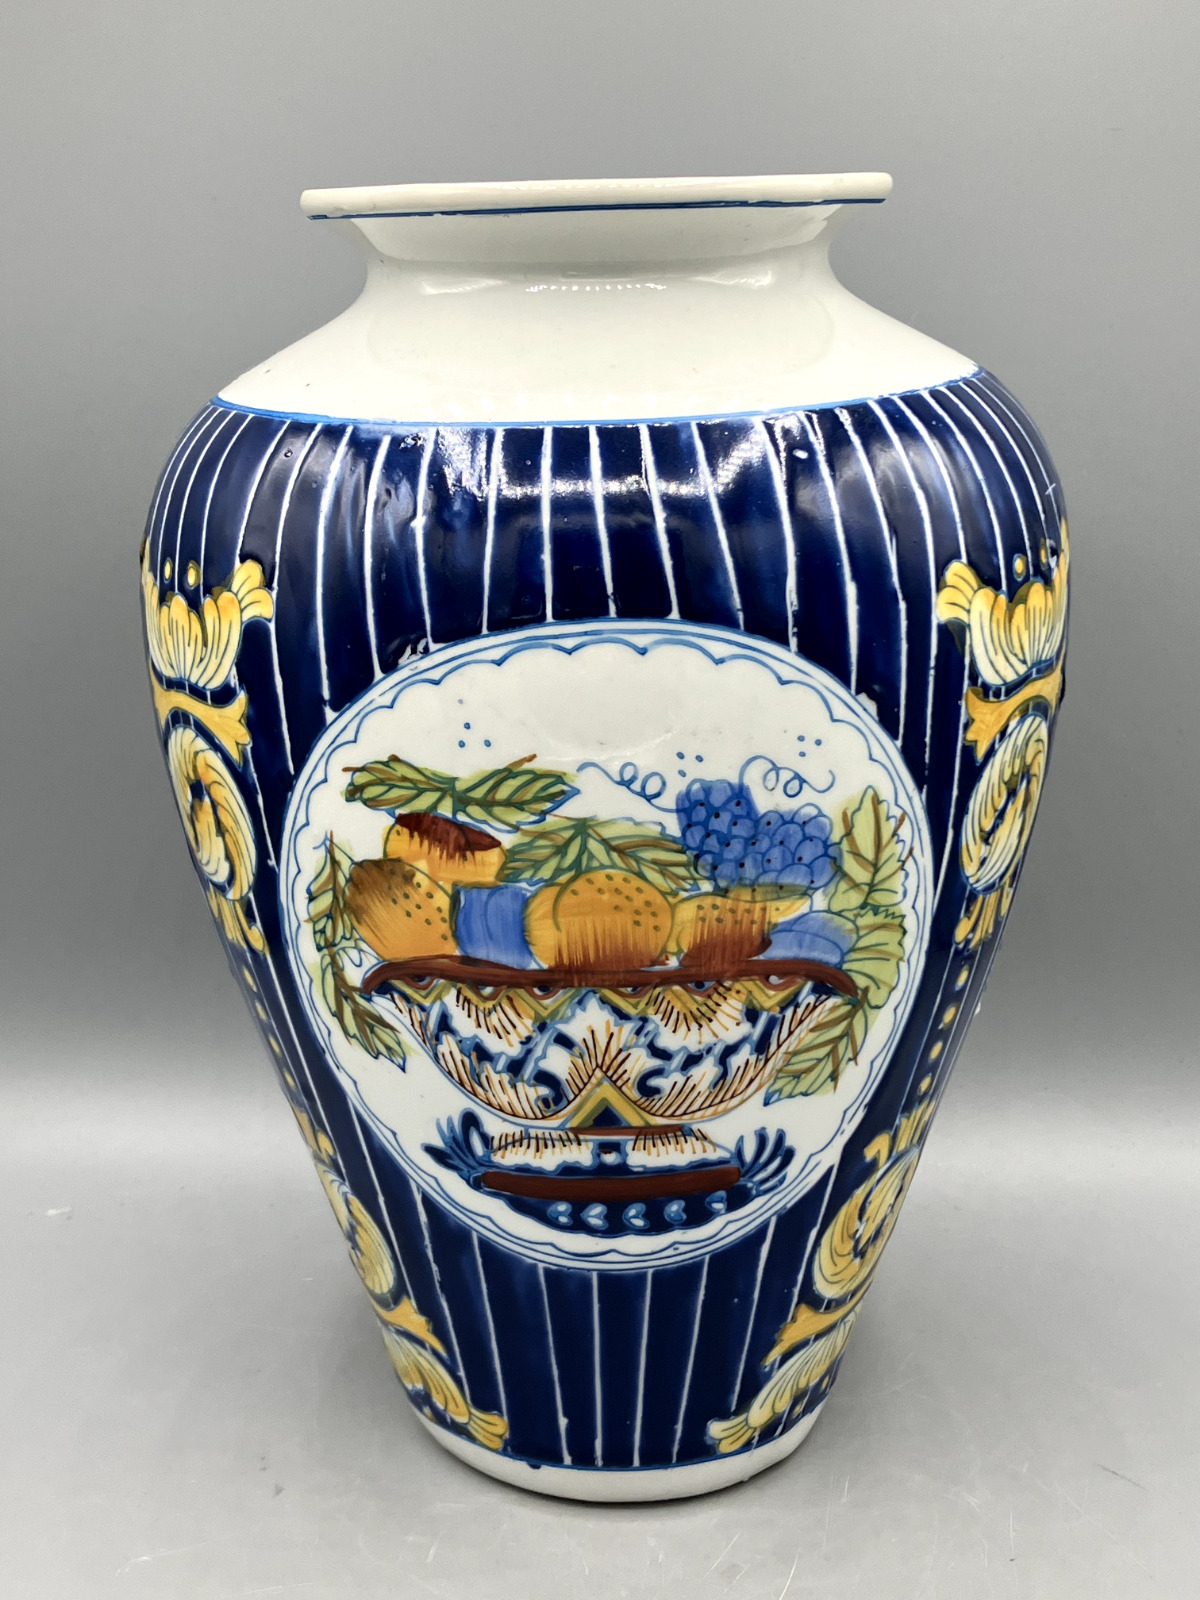 Vintage 1960's Hand Painted Porcelain Chinese Vase Blue Striped